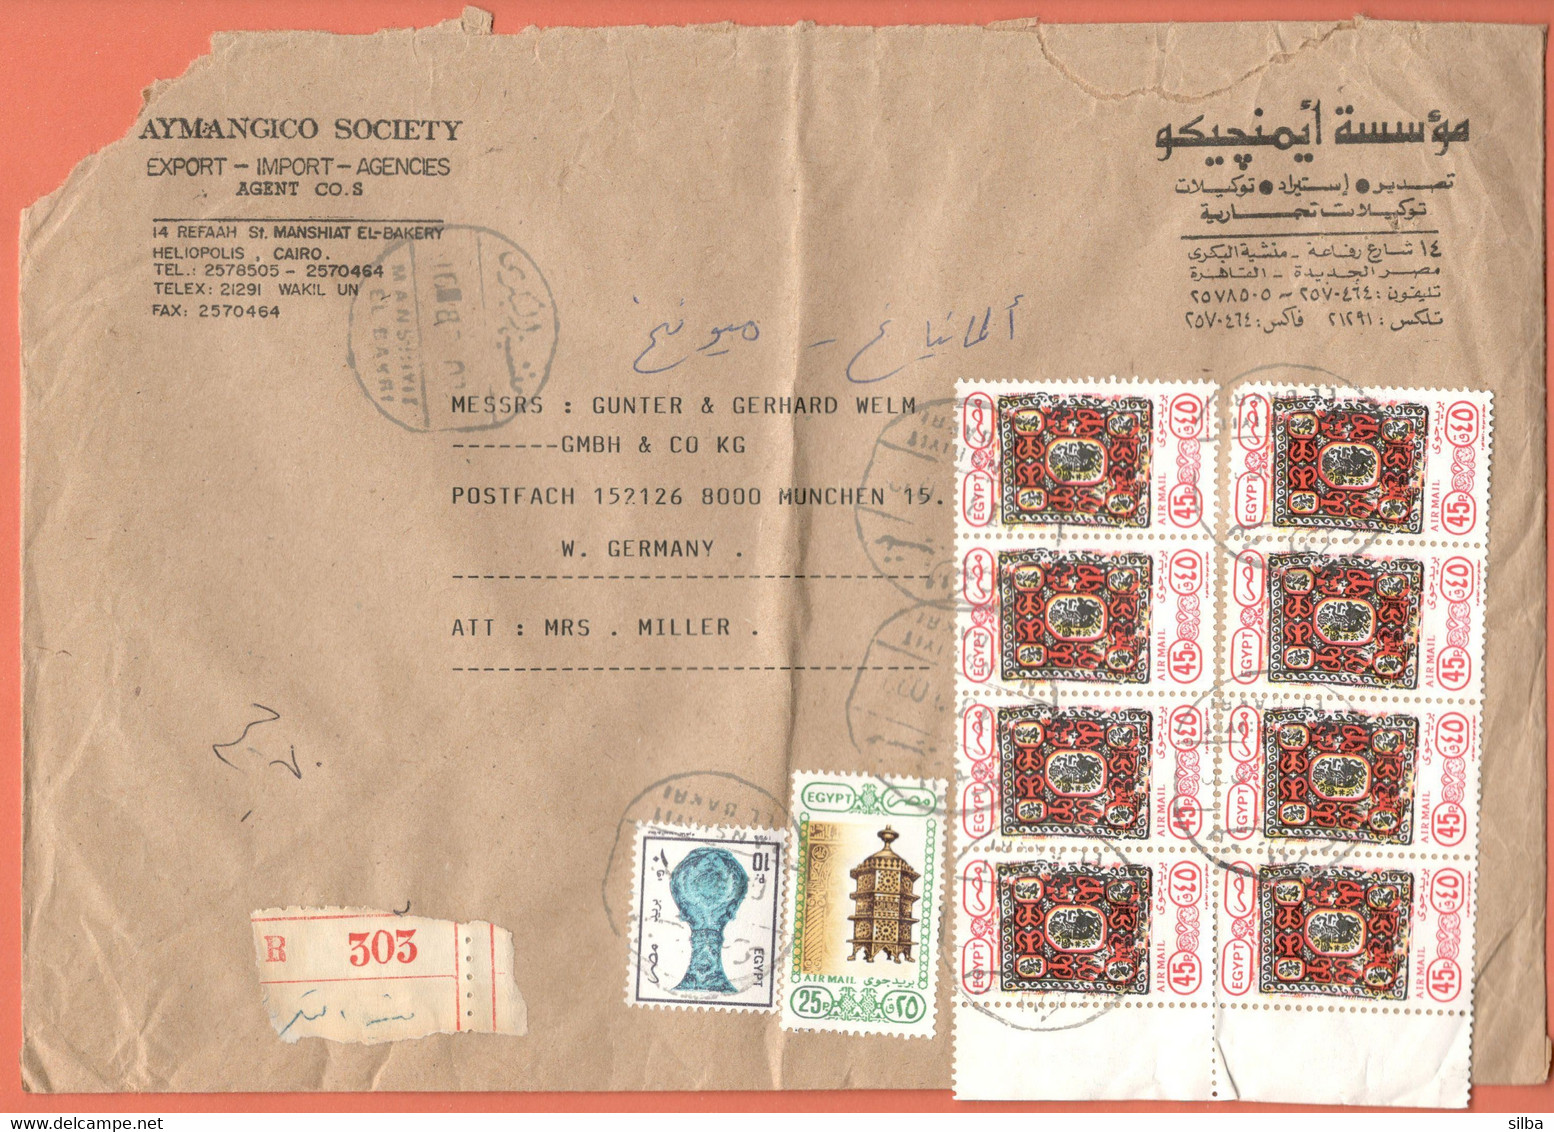 Egypt / Airmail - Art And Mosques, Carpet 45 P, Lantern 25 P, Vase 10 P, 1989 - Covers & Documents